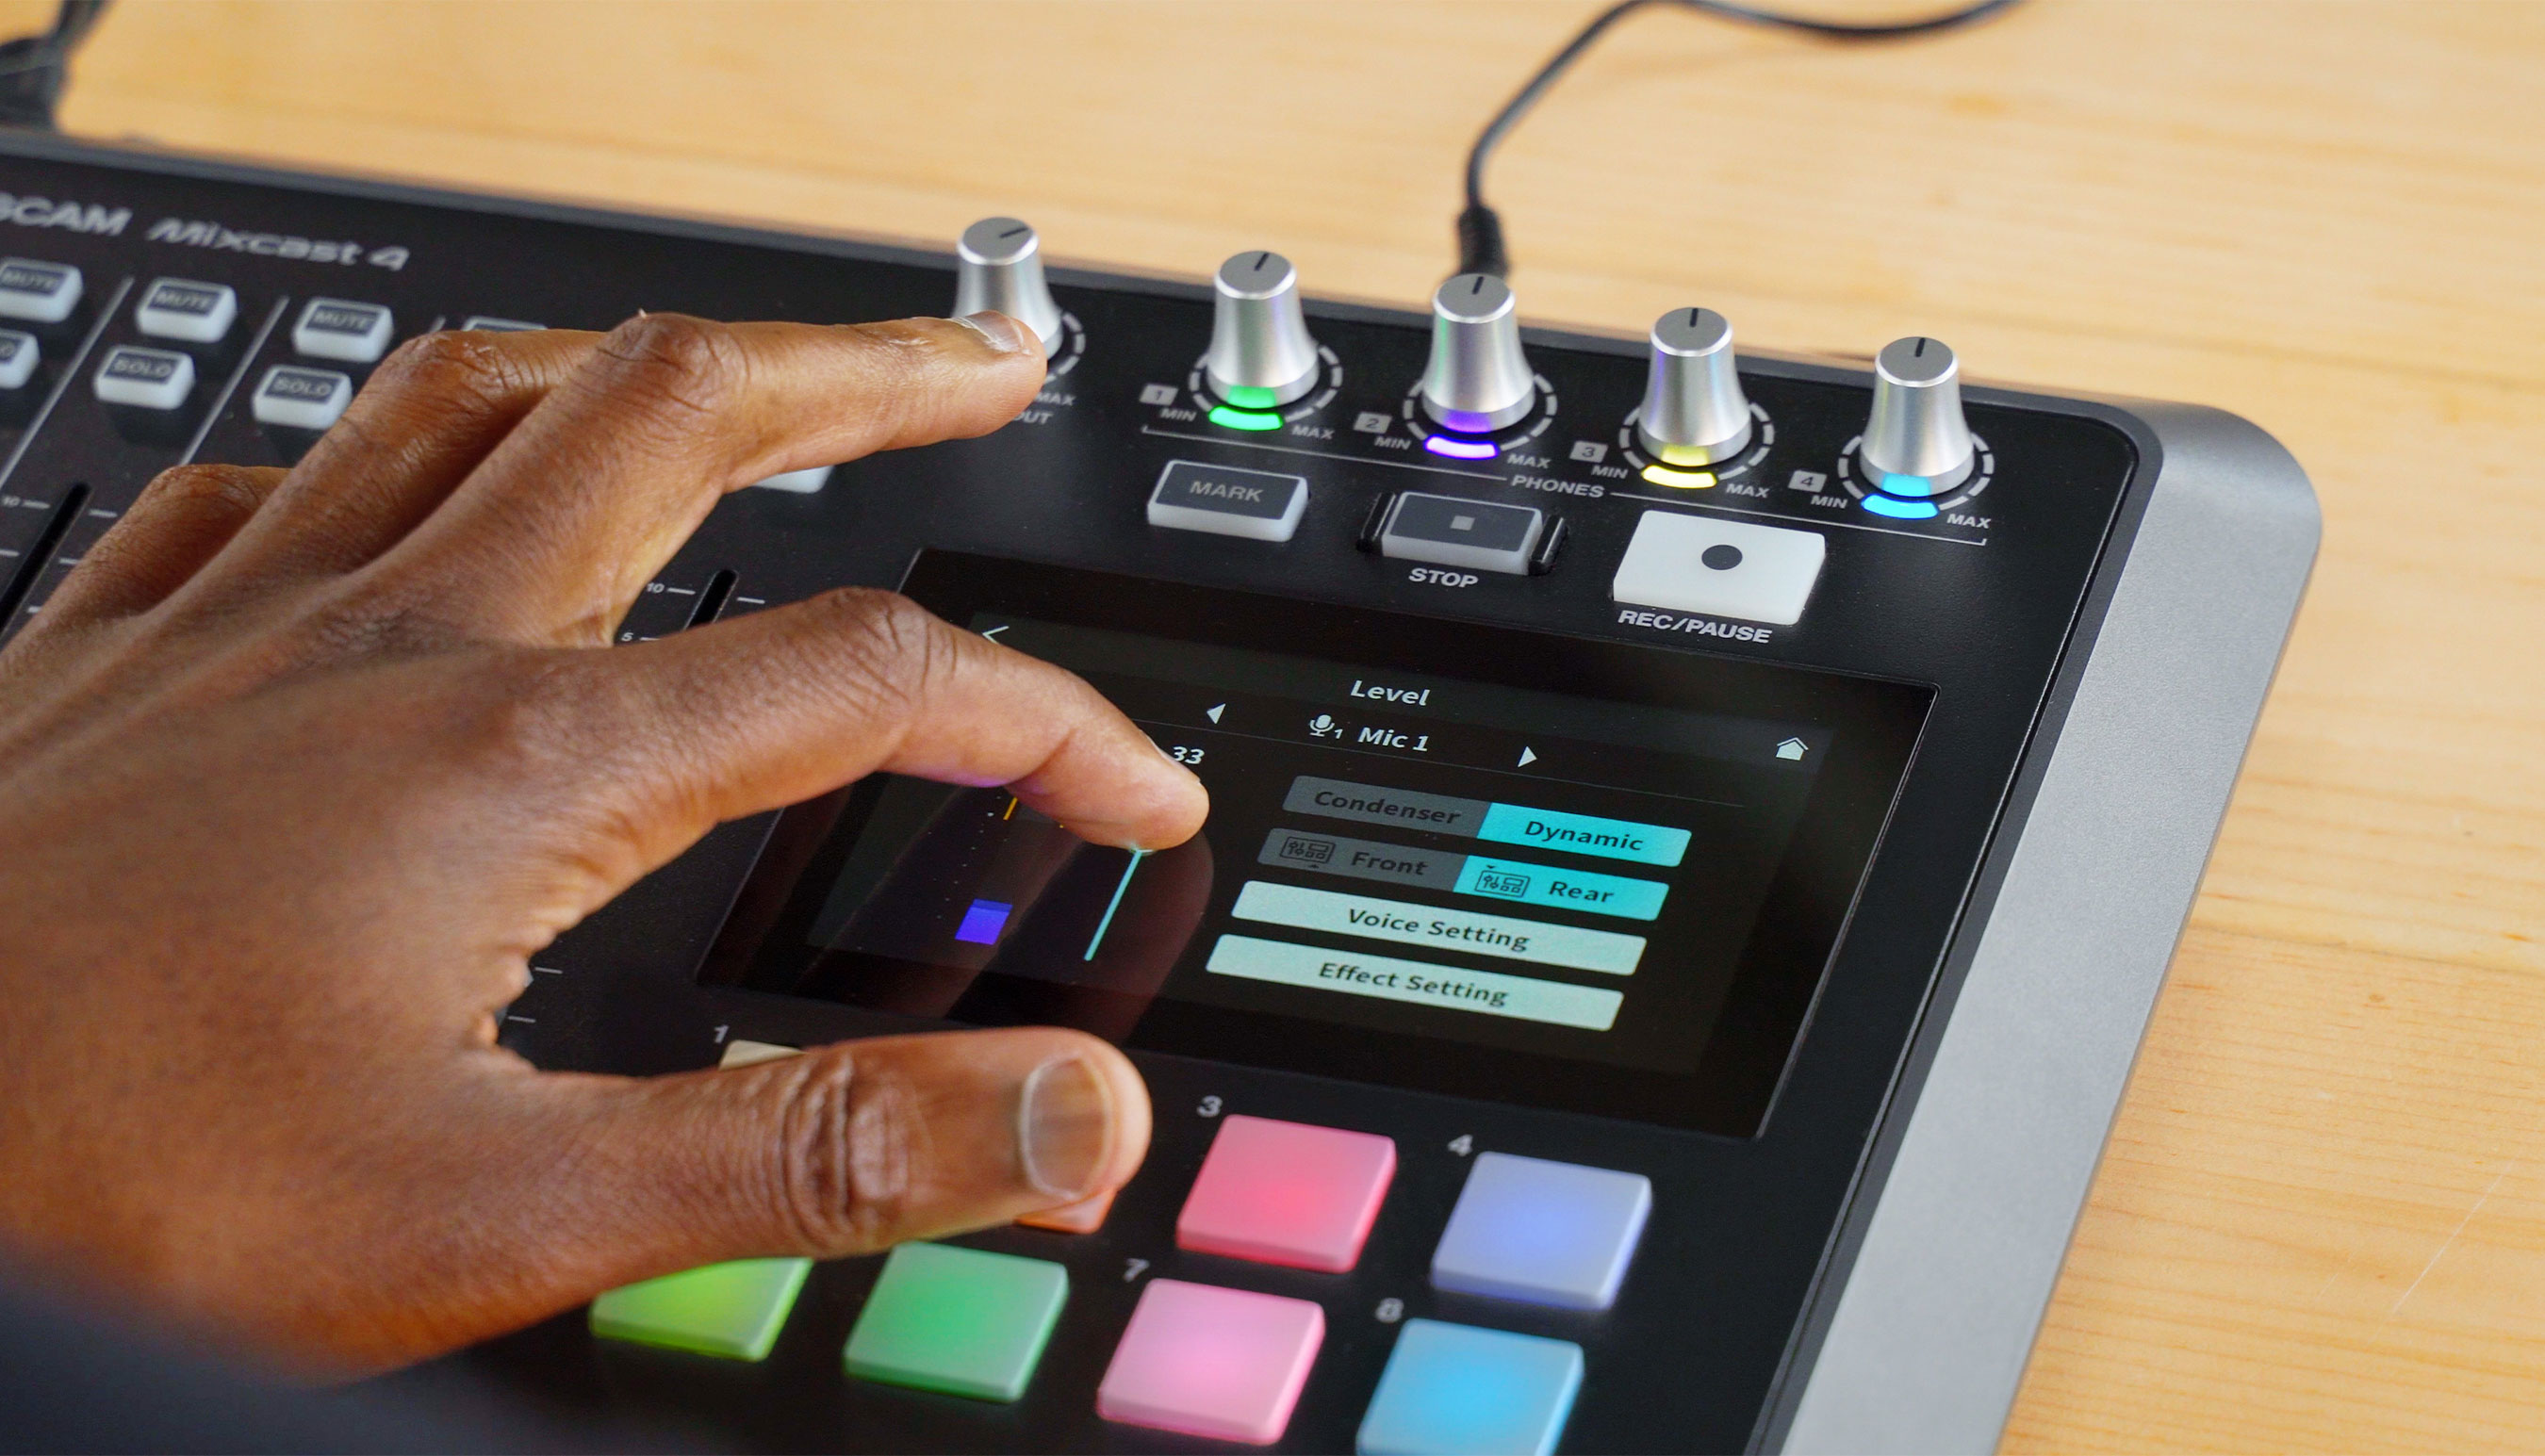 Controlling your production has never been easier! With The Mixcast 4s large 5-inch full color touch screen, intuitively change any parameter with your fingertips.